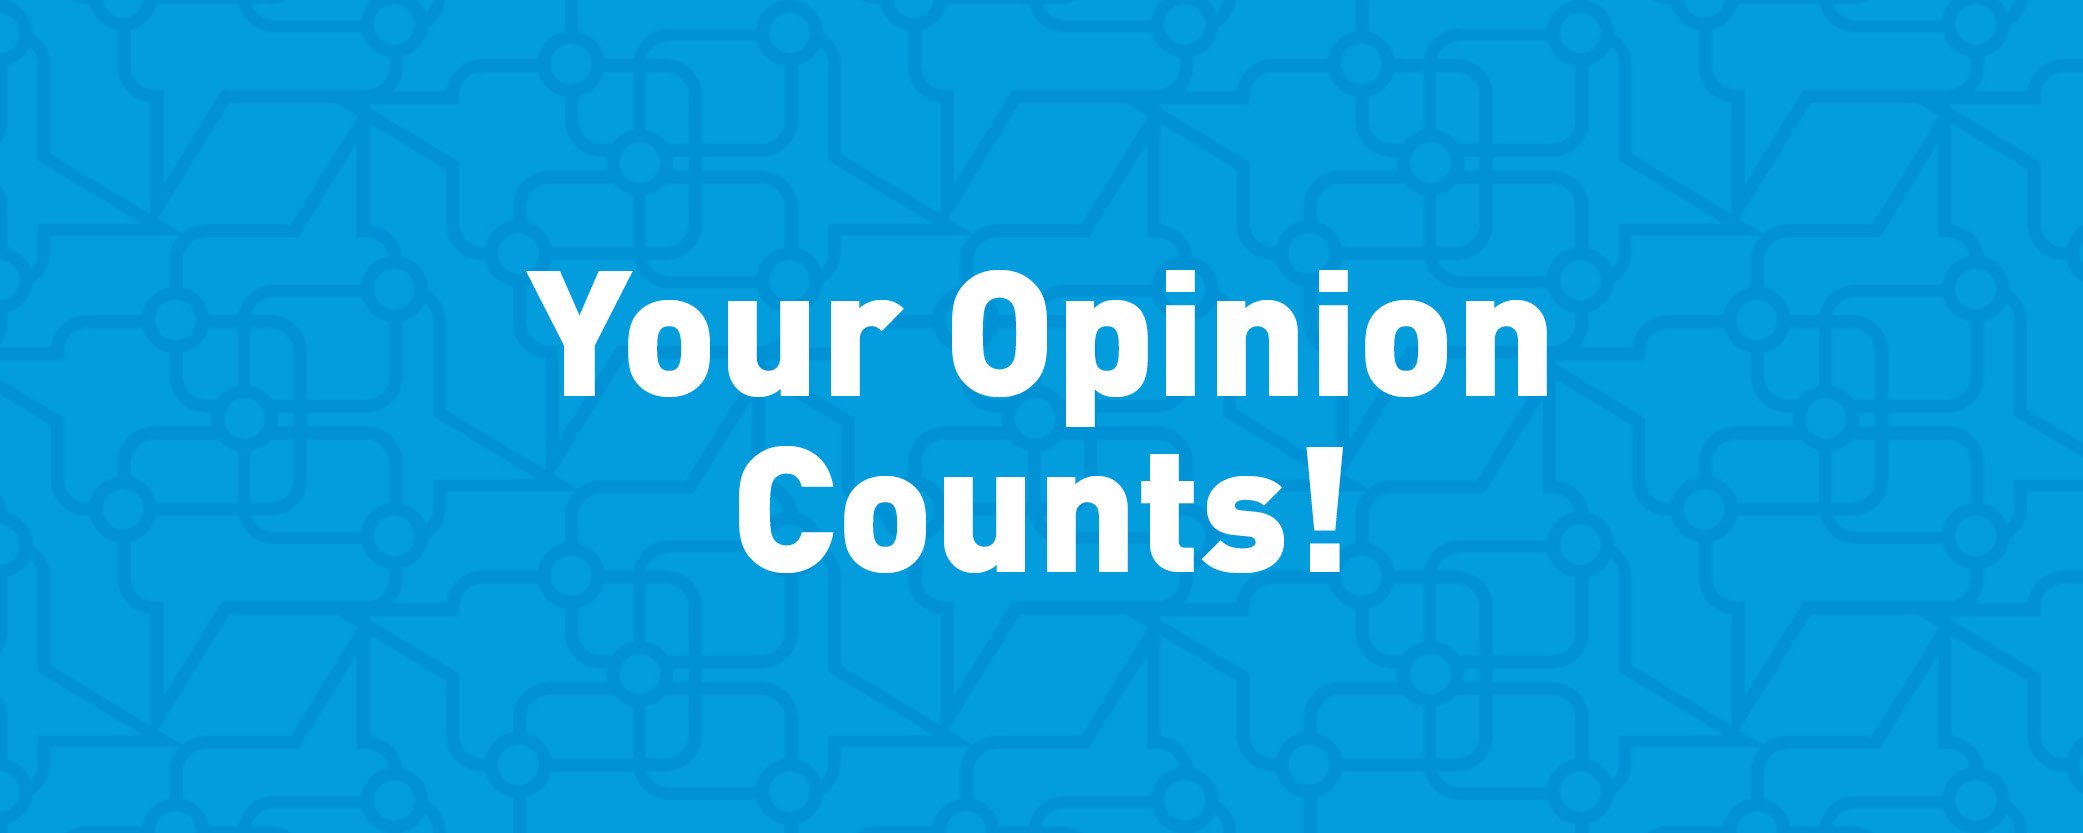 Graphic page banner with the text "Your Opinion Counts!"